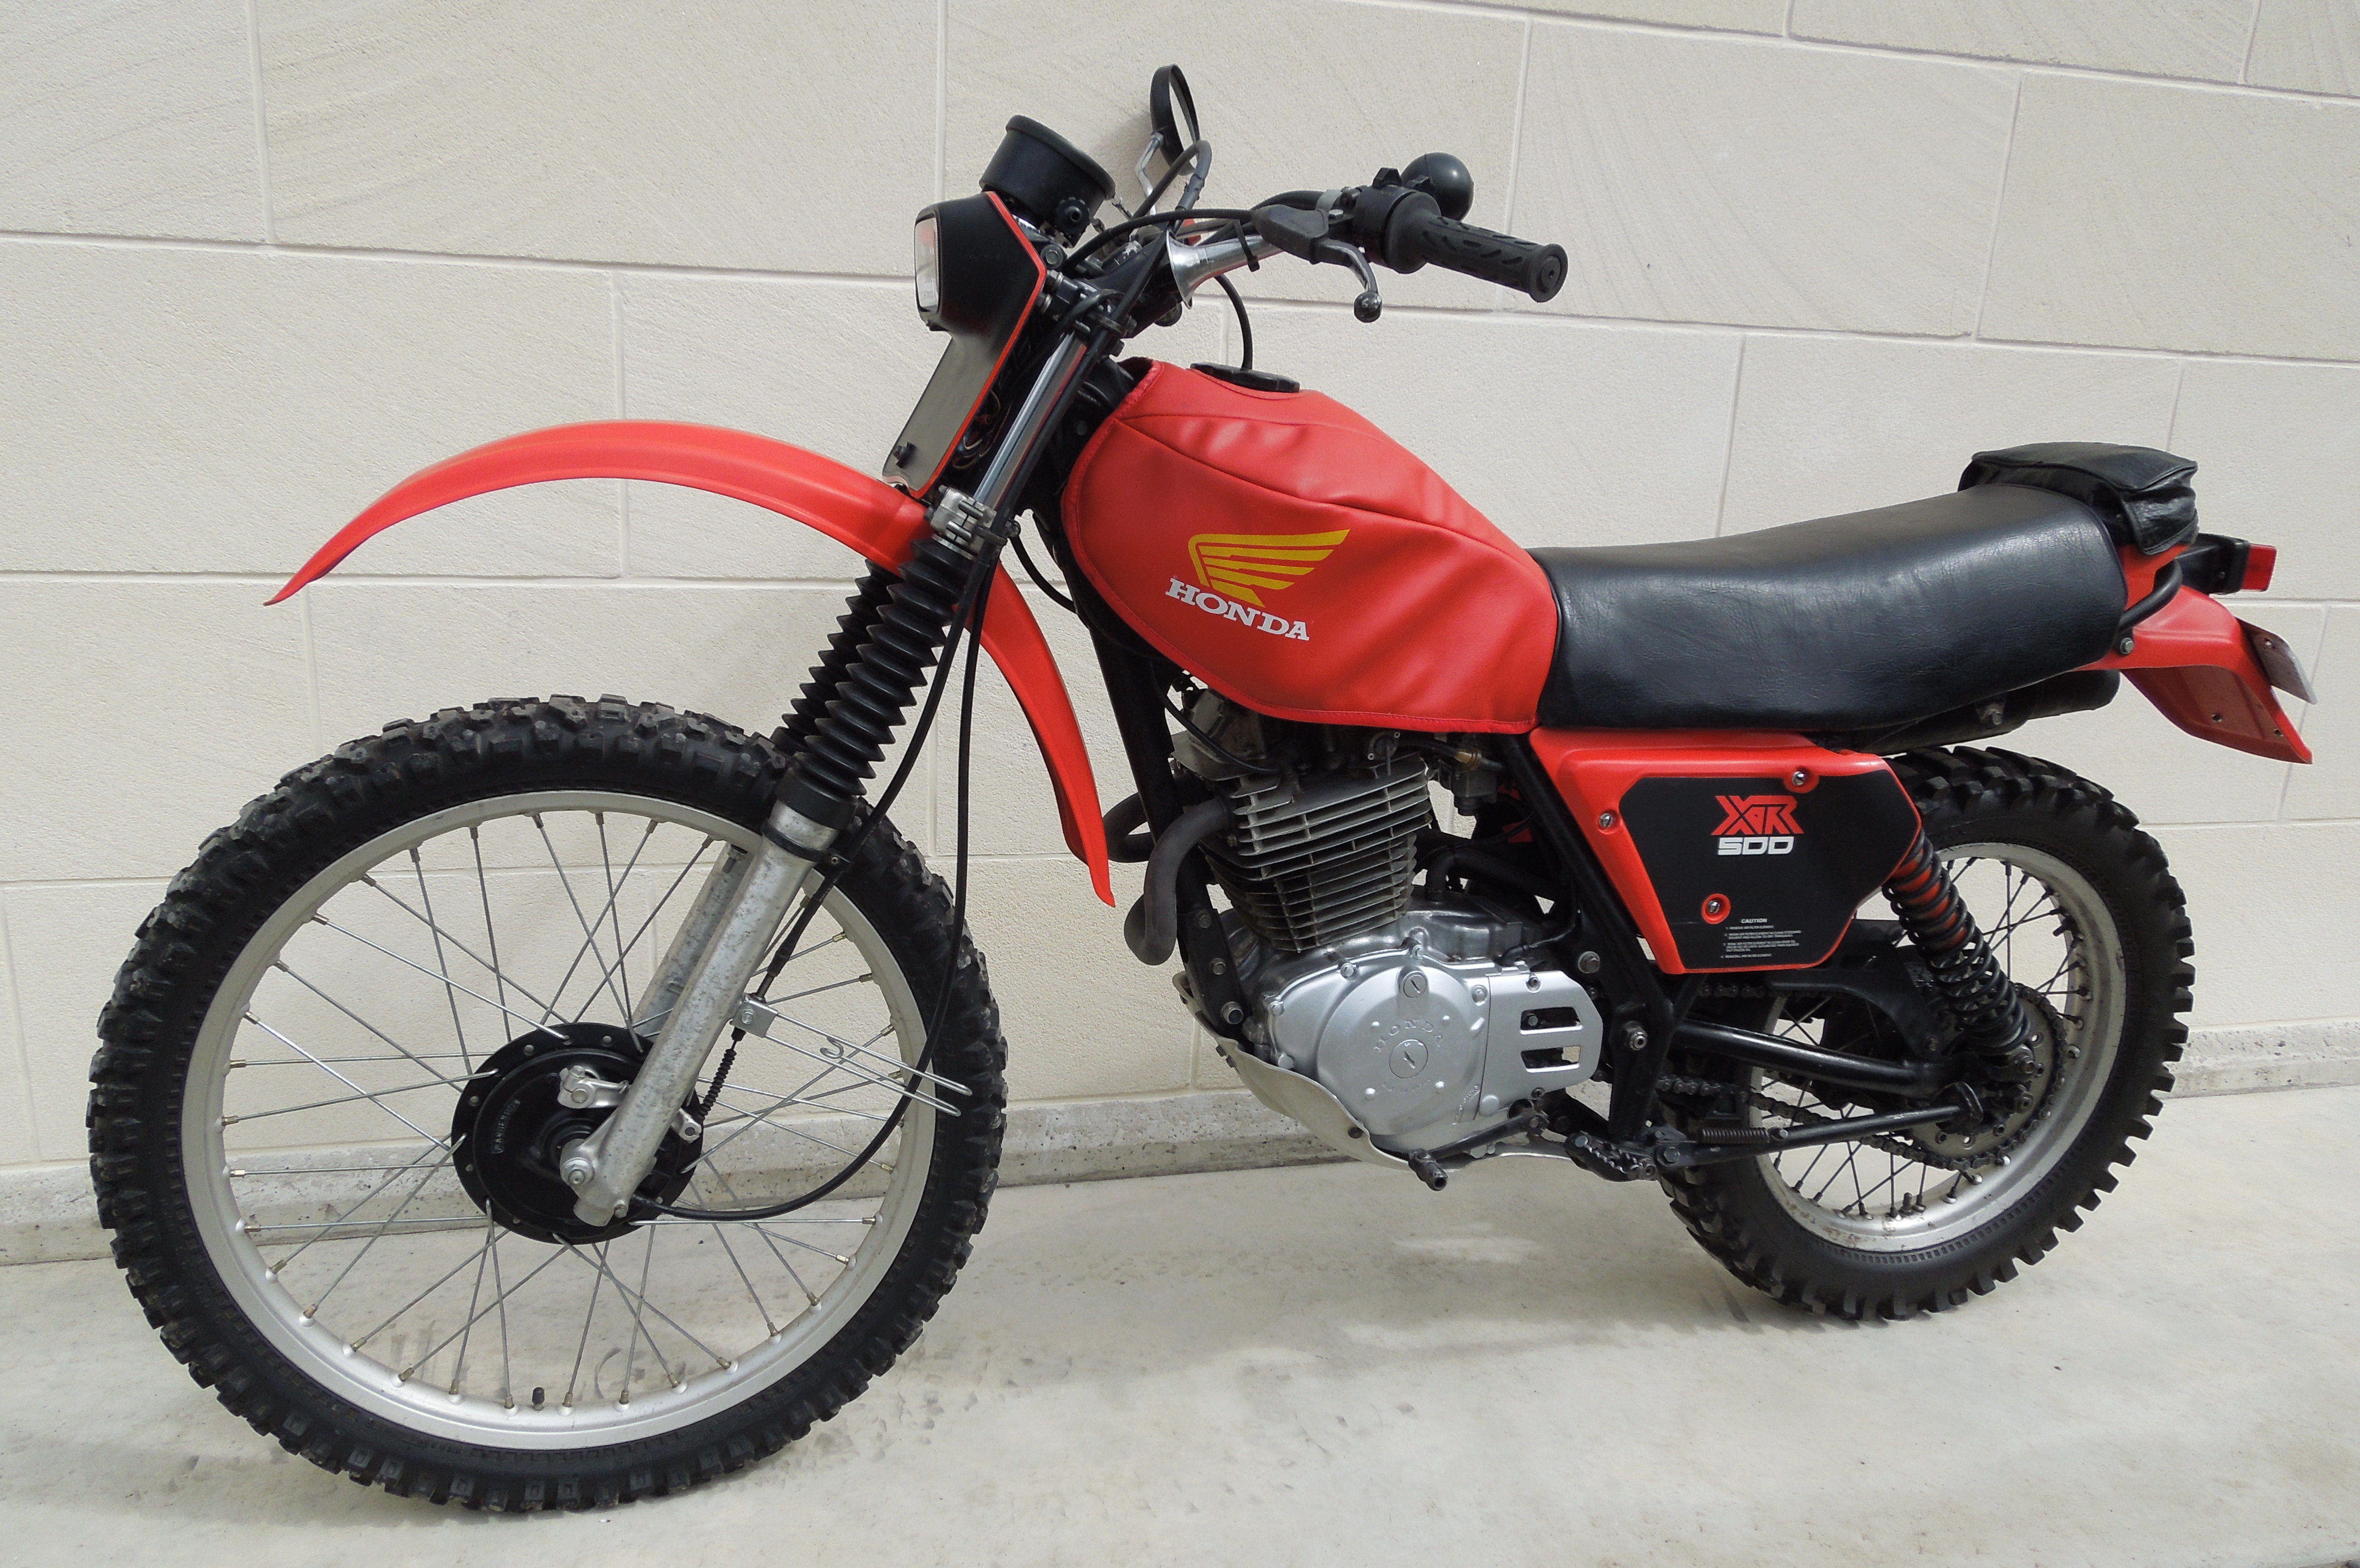 Review Of Honda Xl 250 R 1986 Pictures Live Photos Description Honda Xl 250 R 1986 Lovers Of Motorcycles